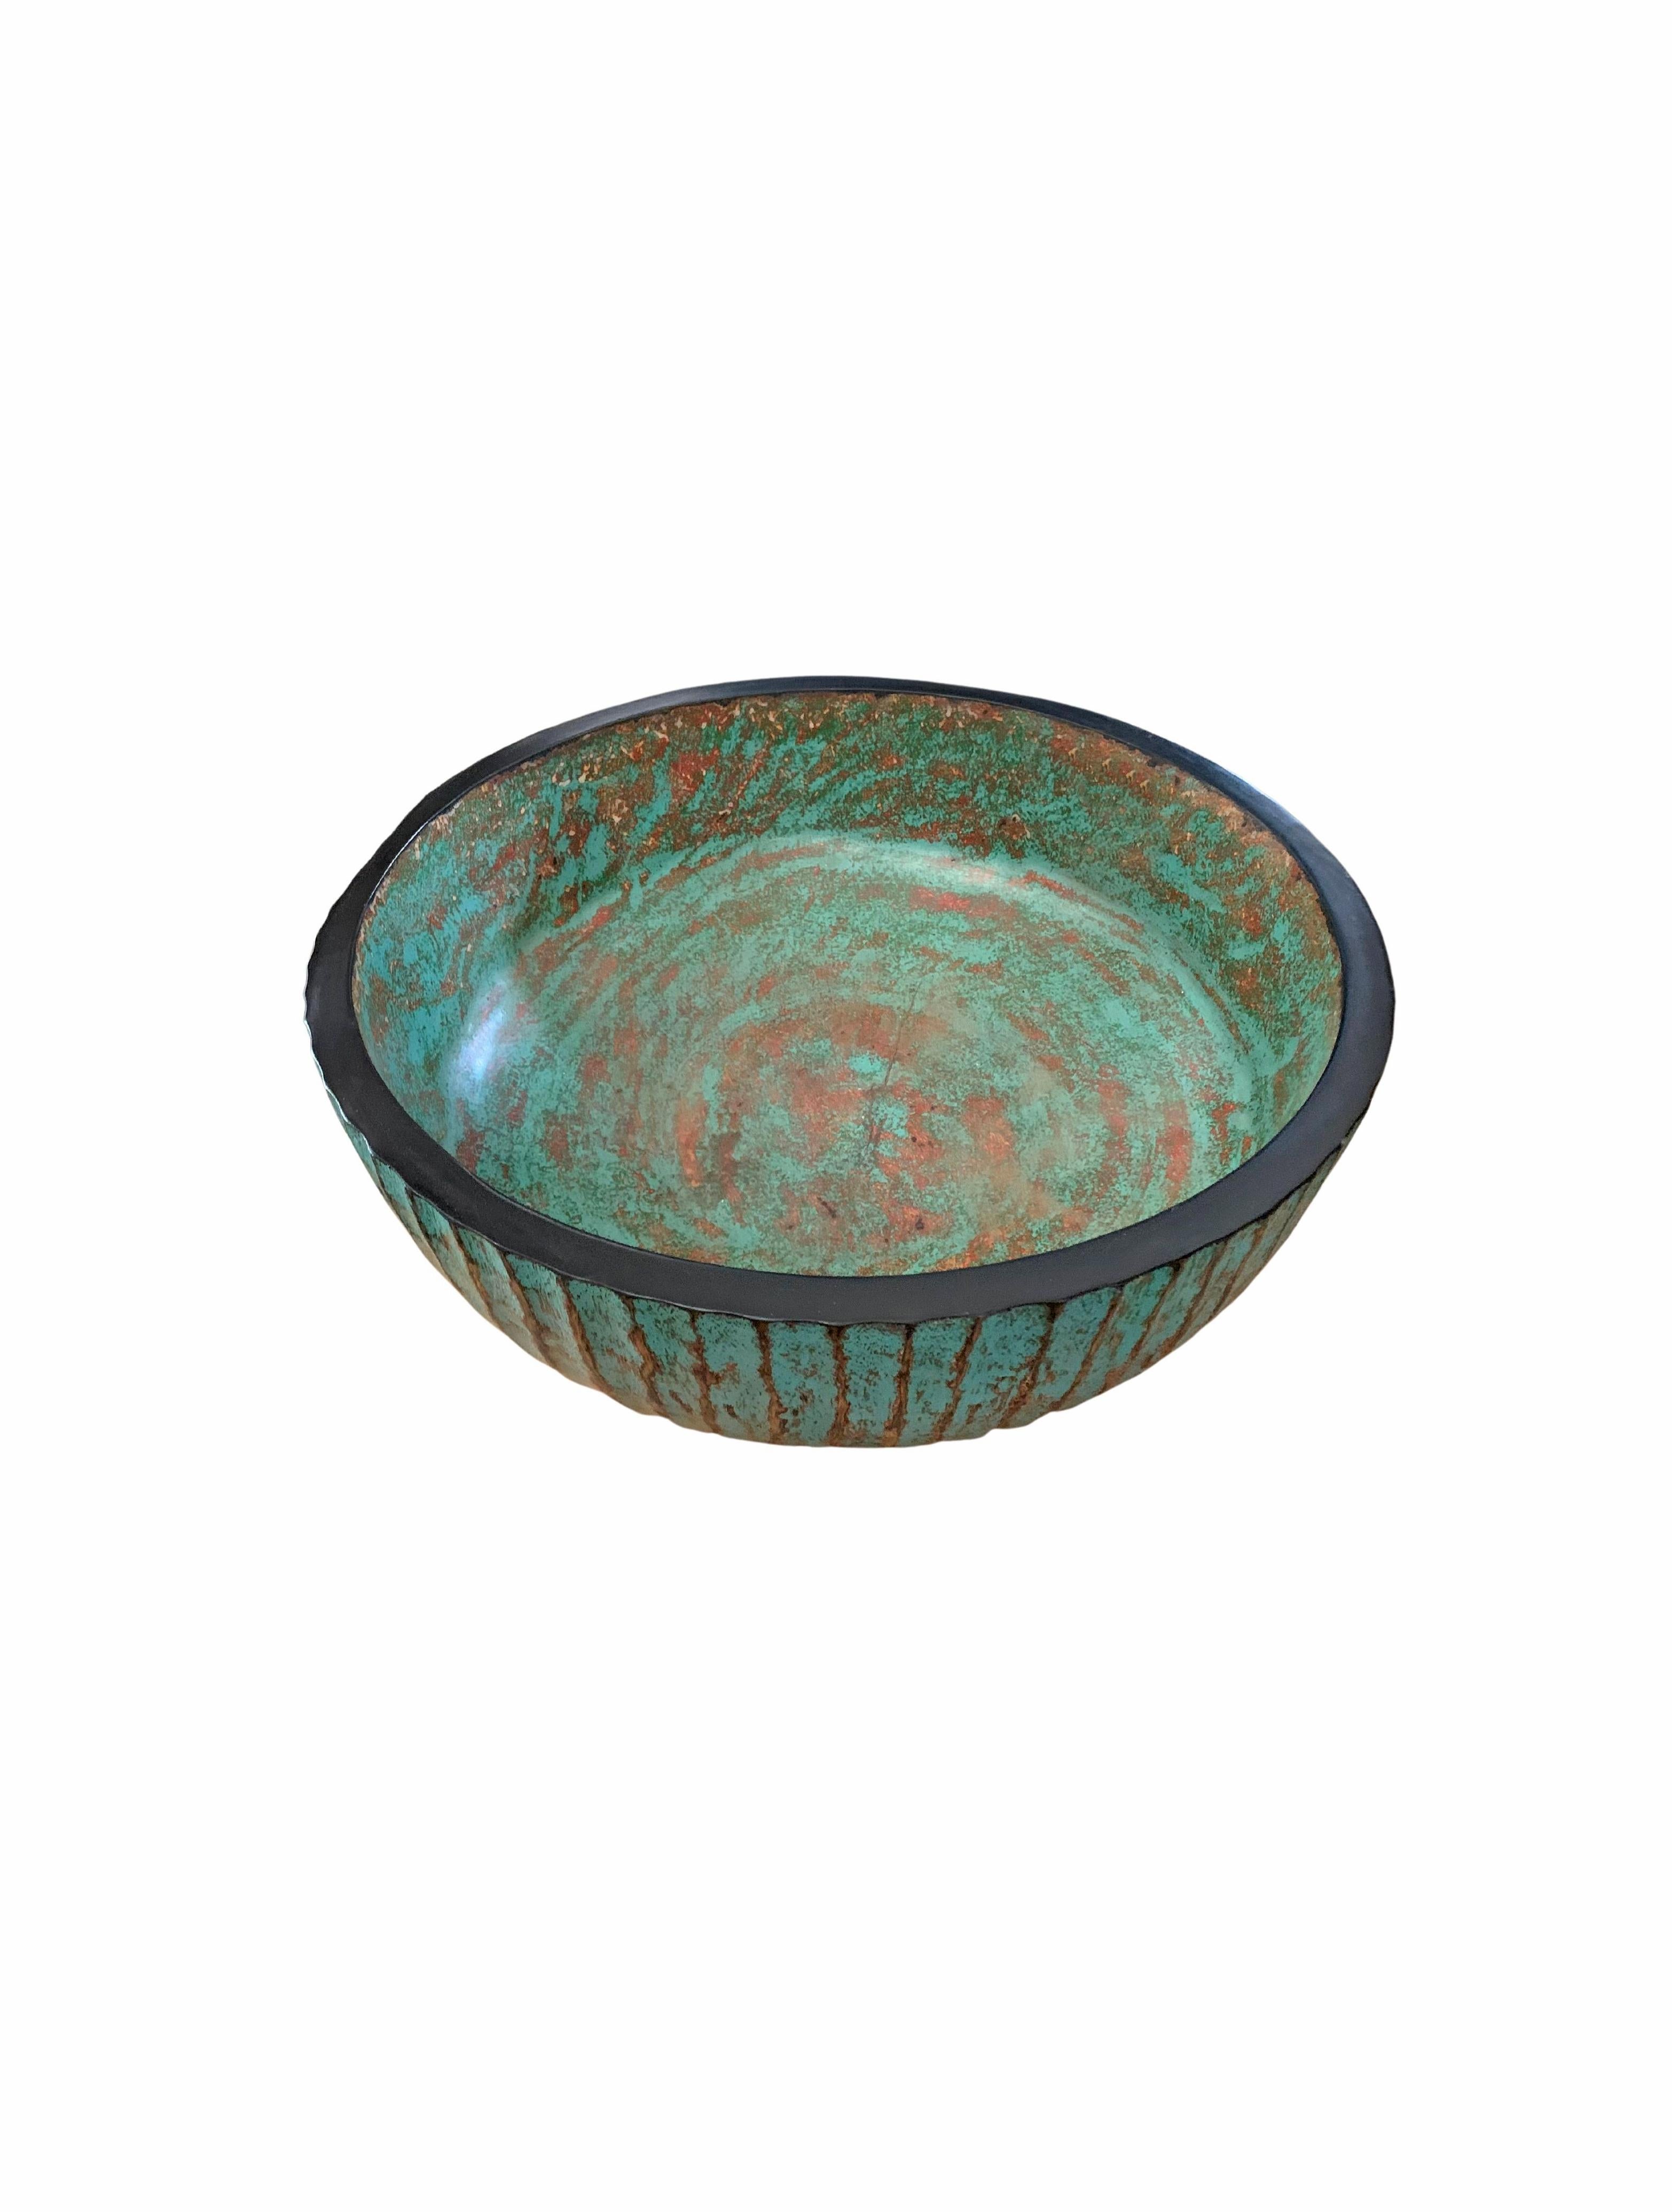 A hand-crafted mango wood bowl. The bowl was cut from a much larger slab of mango wood and features a ribbed texture on its sides. It features a wonderful turquoise pigment that is then sanded down to achieve a unique texture. The bowl is then